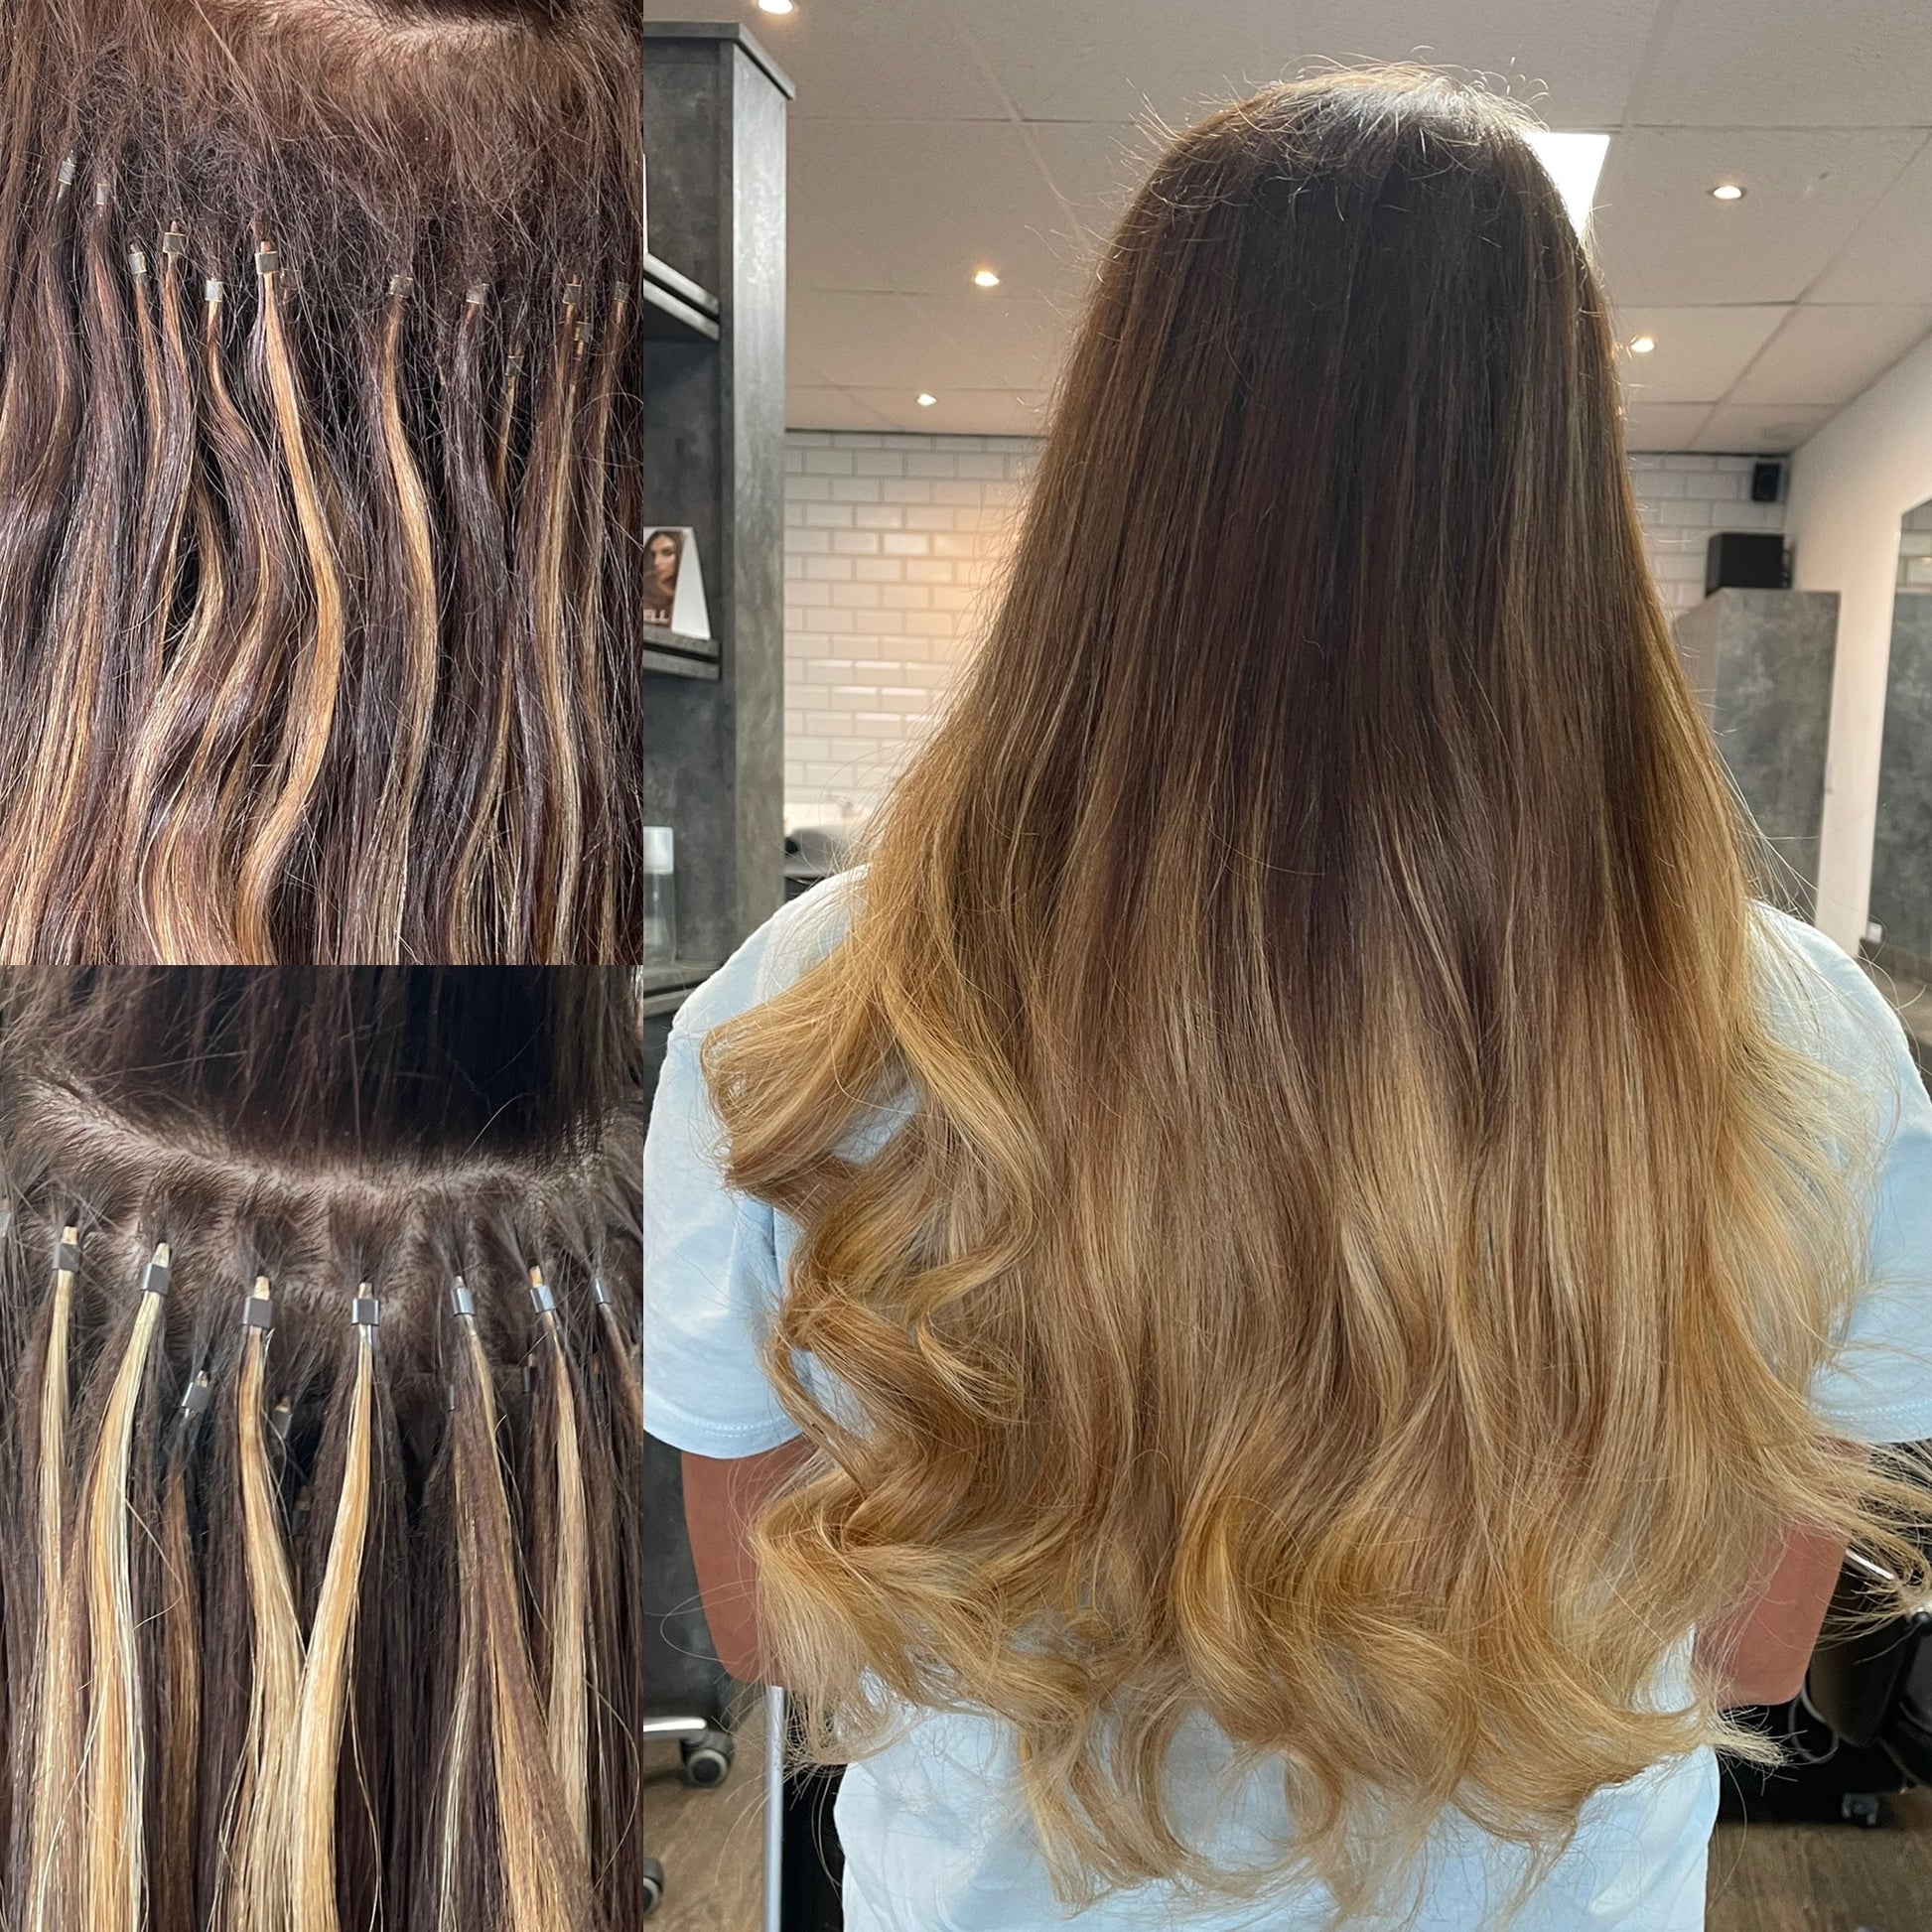 Expert Refit Services for Hair Extensions - Maintenance and Refit at Che Academy